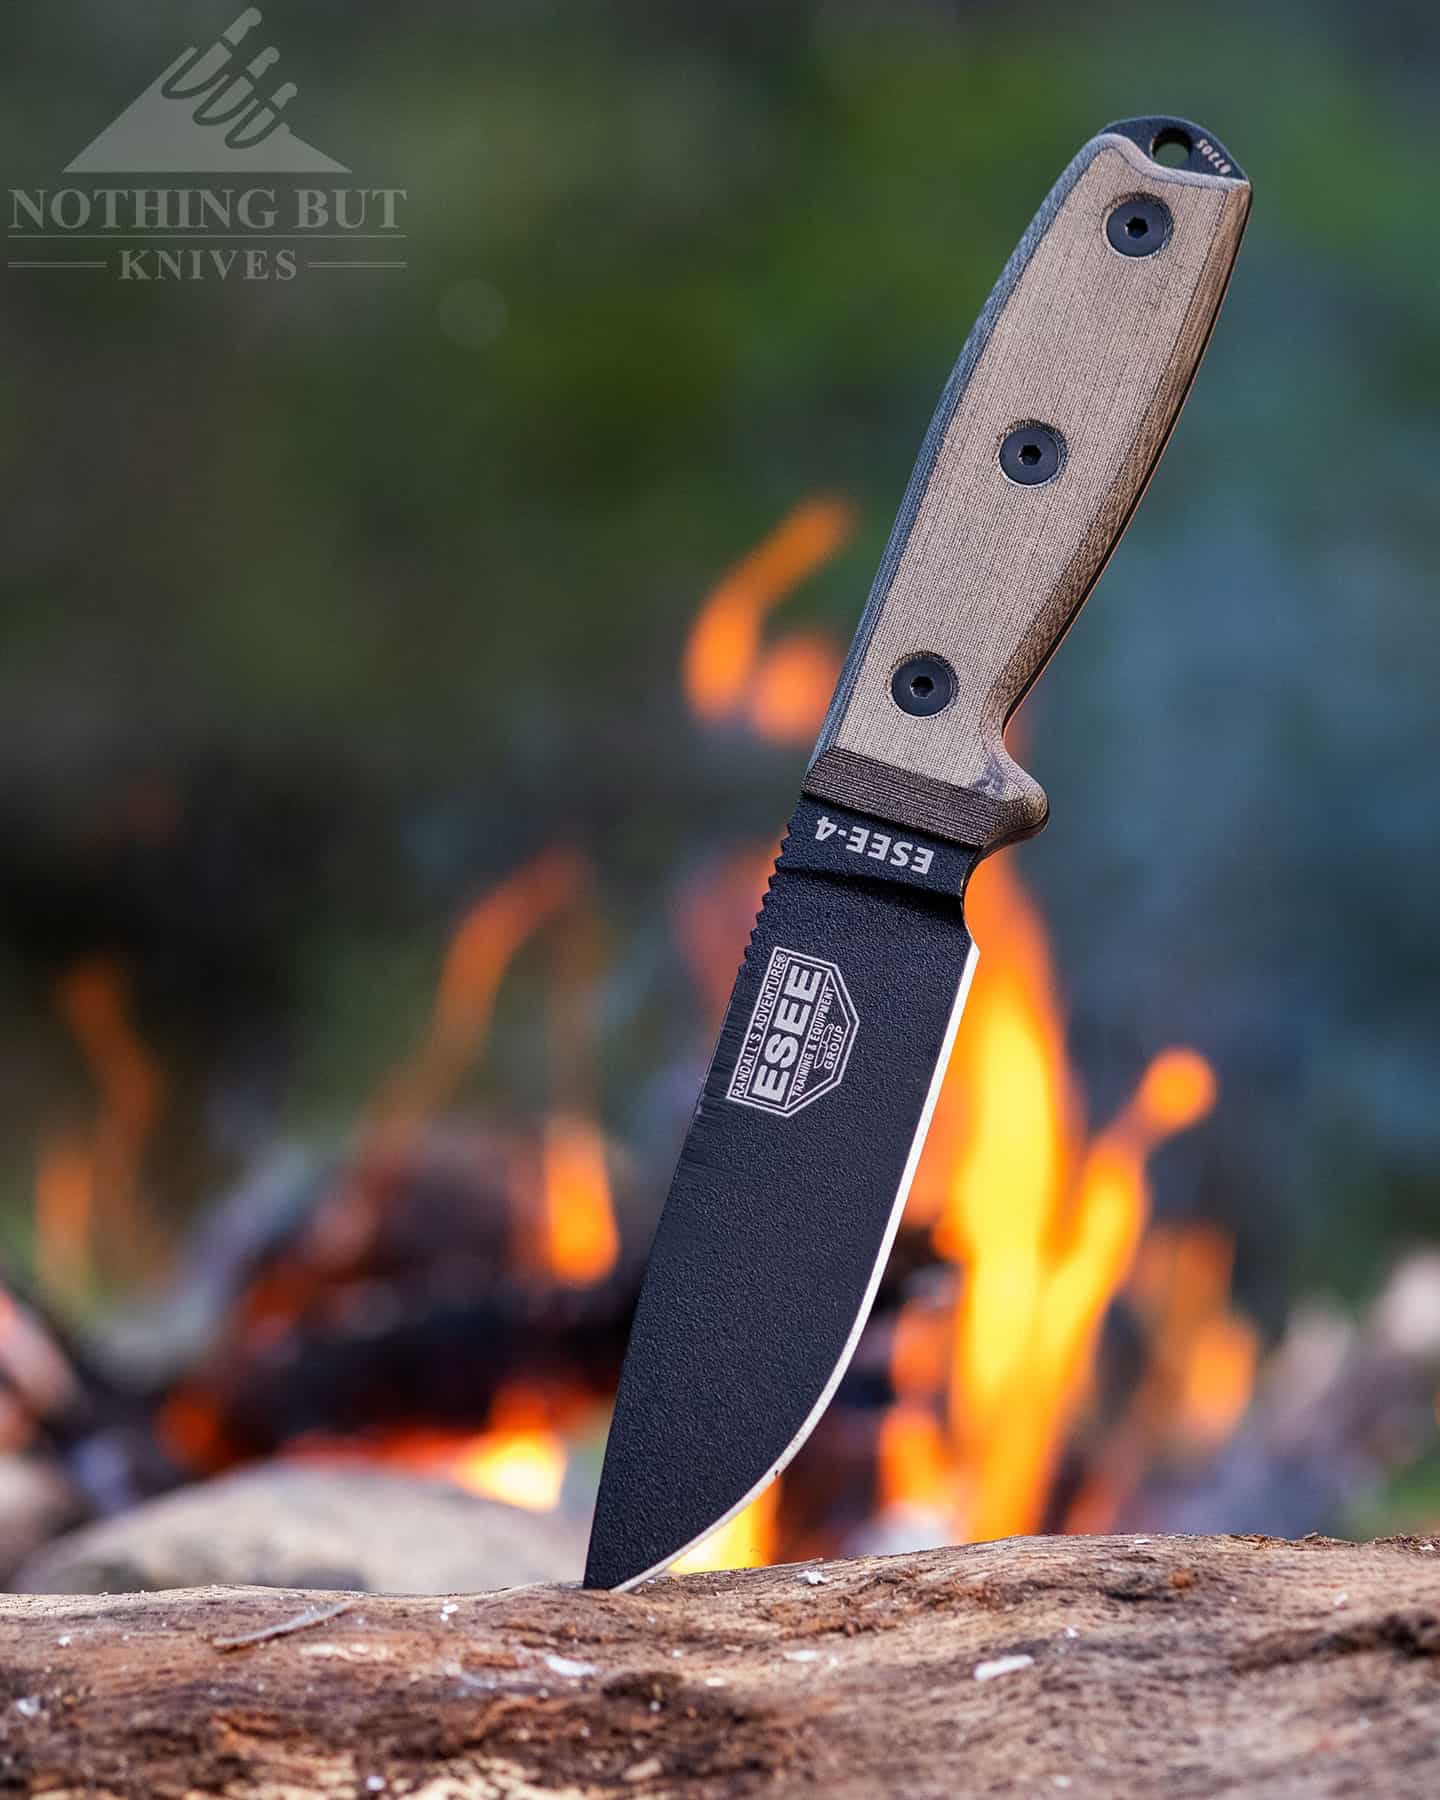 This has become the survival knife standard, though, and for good reason. It has been used on camping trips and outdoor expeditions around the world.